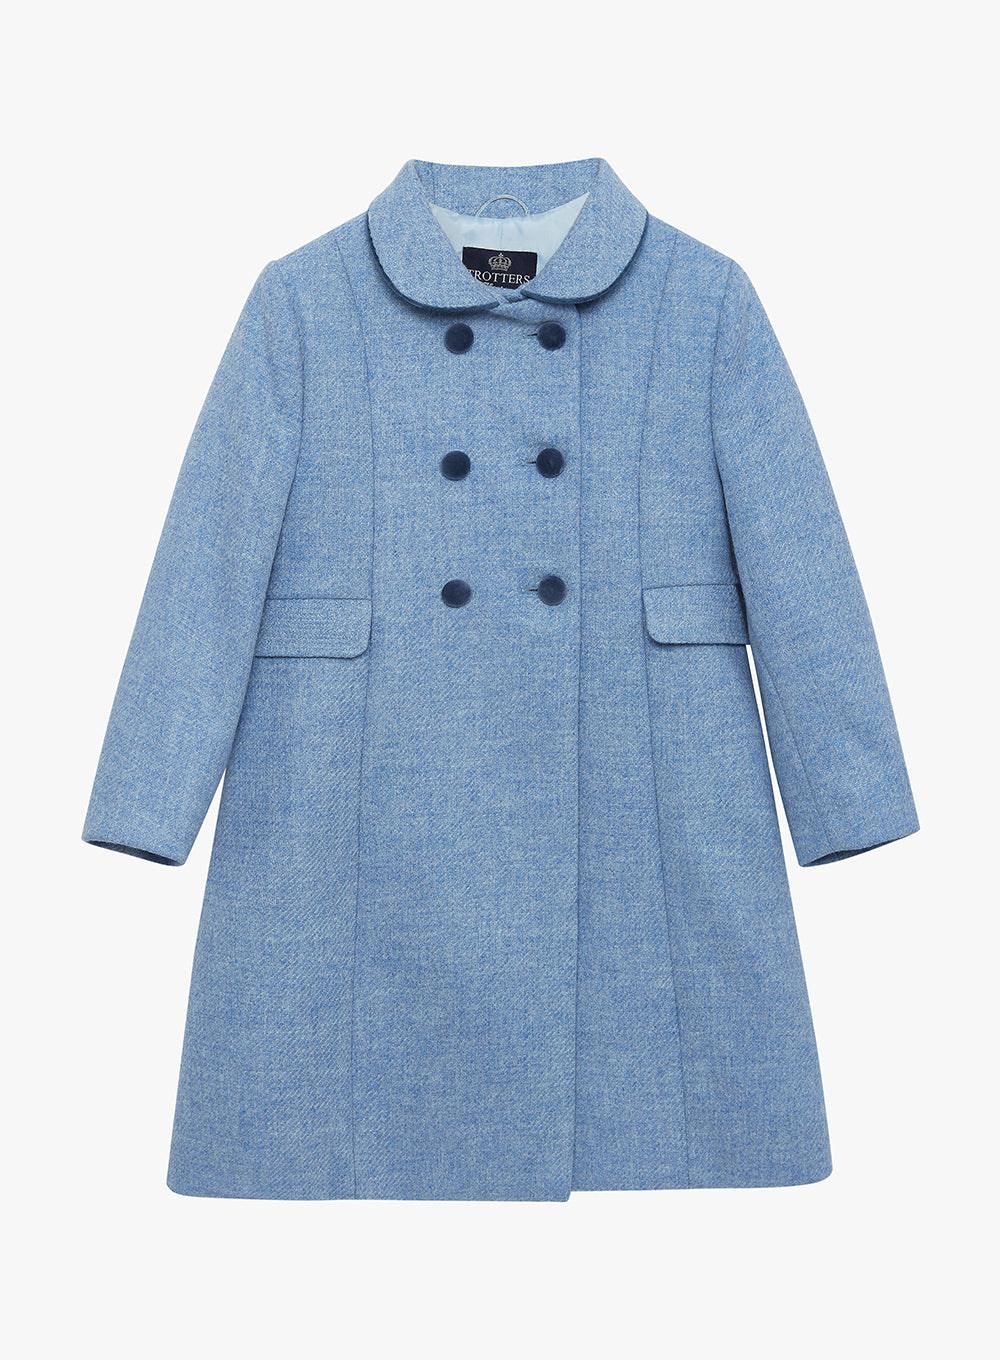 Trotters Heritage Classic Children's Coat in Pale Blue Twill